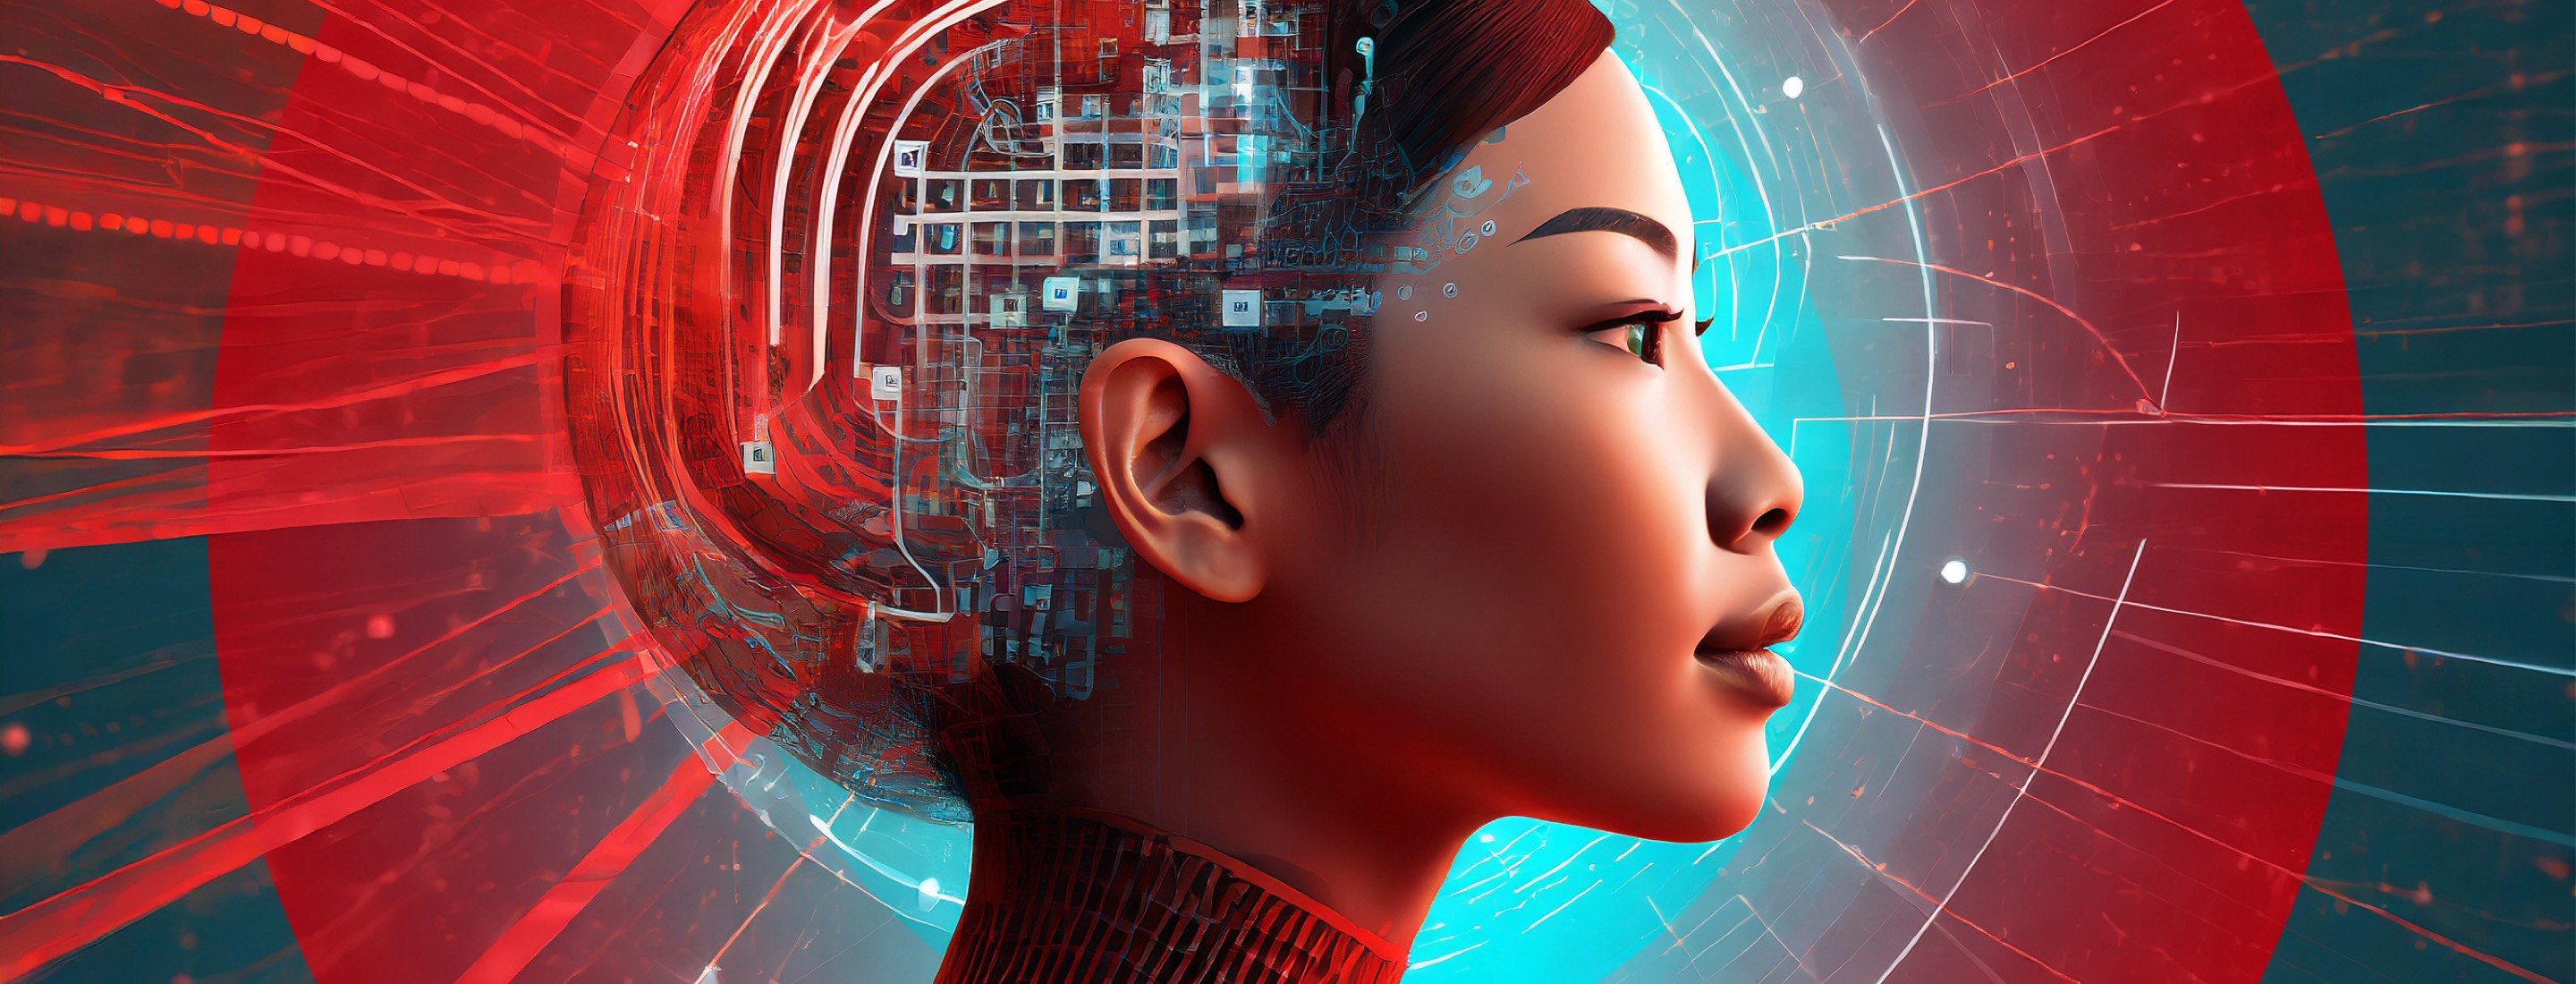 Woman in futuristic setting with circuitry superimposed on her head looks into the distance